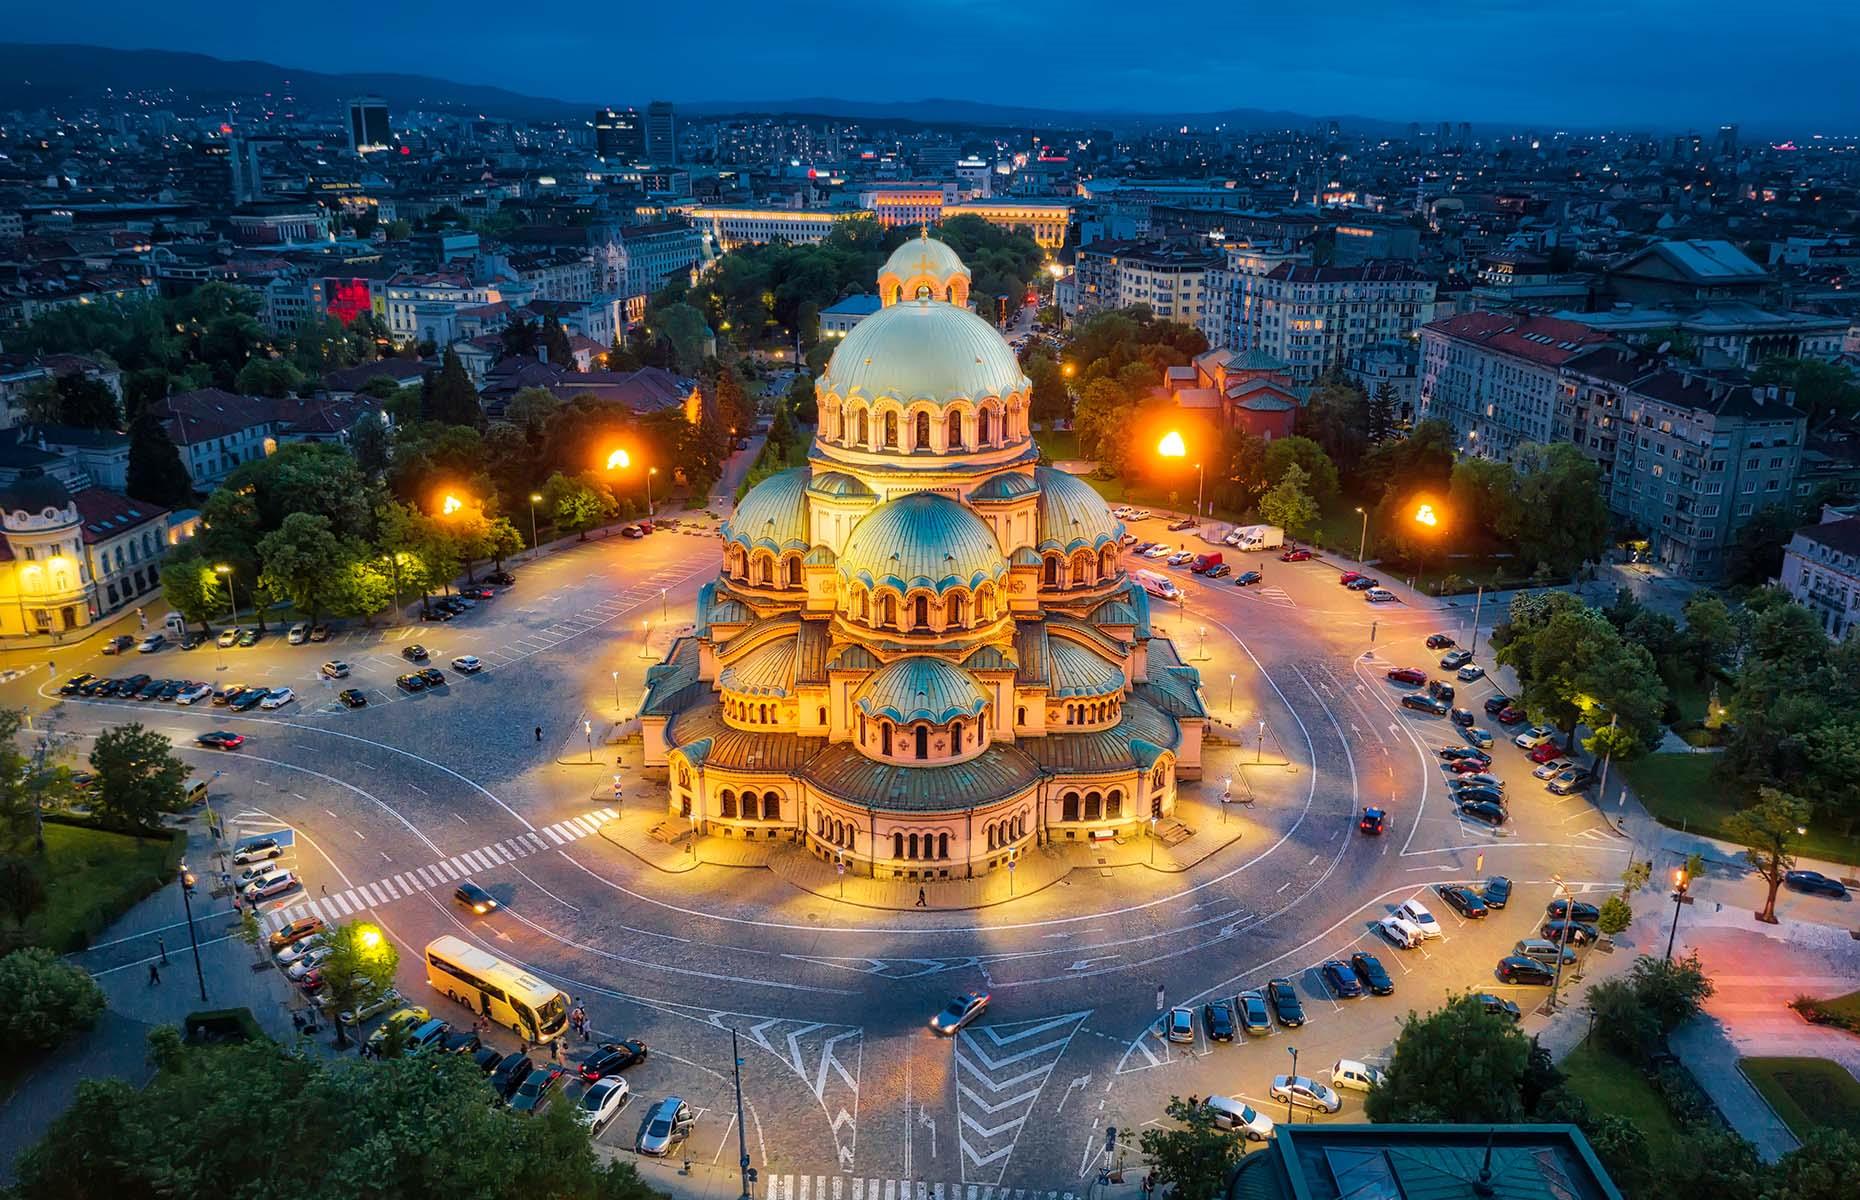 <p>With plenty of museums, galleries and a lively nightlife, it's surprising that Sofia isn't on more city break hot lists. Dominated by the vast, domed <a href="https://www.cathedral.bg/en/home/">St Alexander Nevsky Cathedral</a>, Bulgaria's capital is stunning and best explored on foot to take in the magnificent buildings, from the National Theatre to former mineral baths. There are plenty of green spaces to wander around as well, like <a href="https://borisovagradina.com/">Borisova Gradina</a>, the city's oldest park.</p>  <p><a href="https://www.loveexploring.com/galleries/89604/the-worlds-beautiful-cathedrals-you-should-visit-once-in-your-lifetime?page=1"><strong>Take a look at the world's most beautiful cathedrals</strong></a></p>